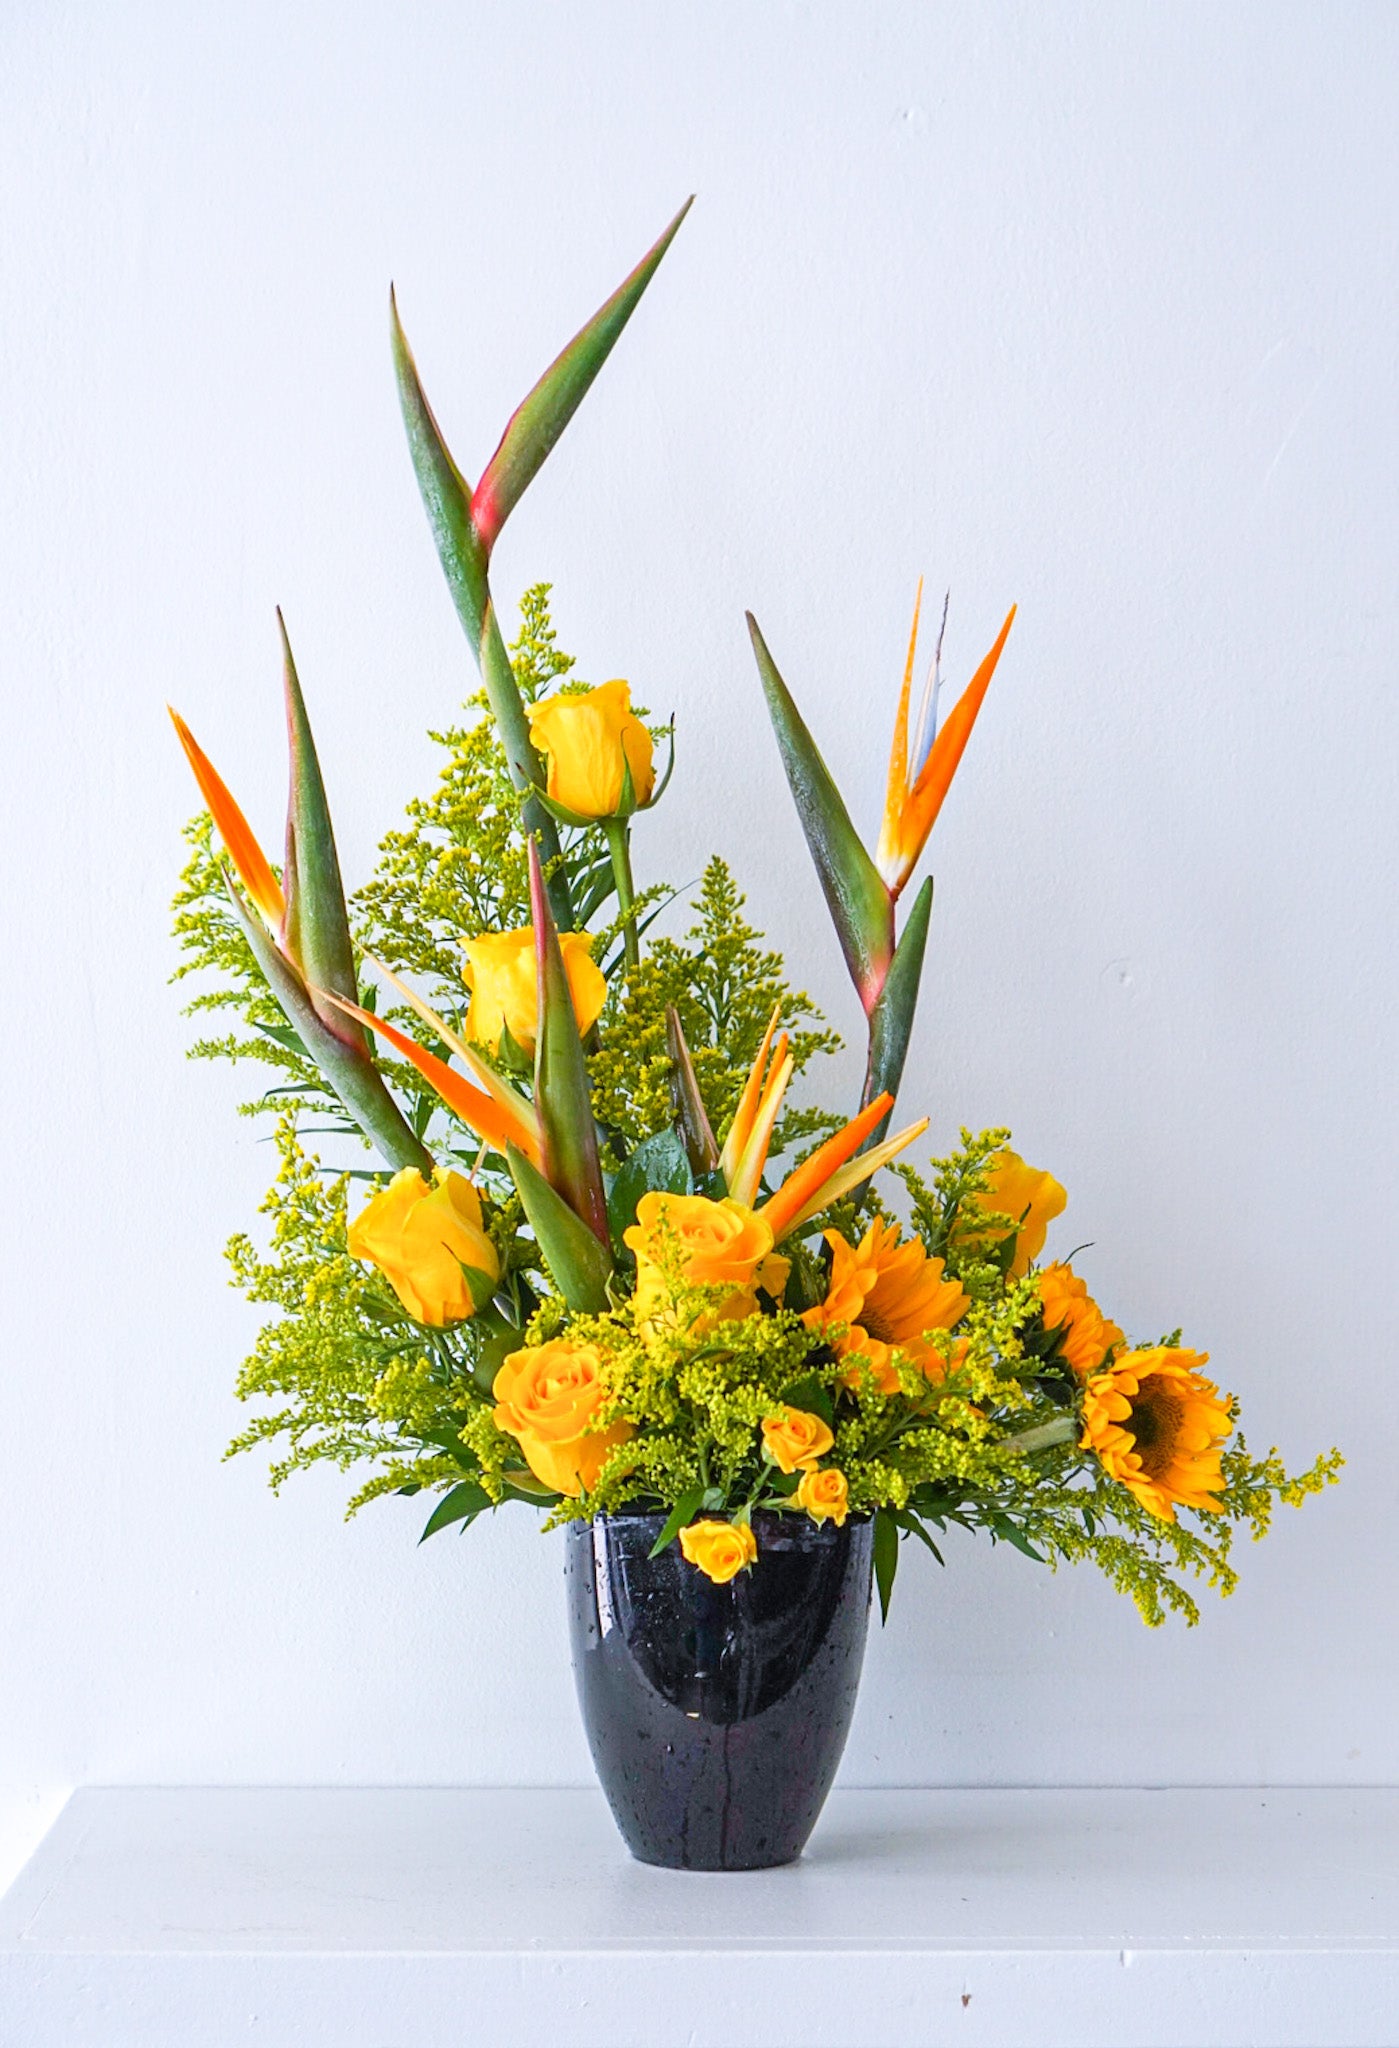 Send sun and paradise someone's way with this striking arrangement. We offer same-day and next-day delivery through out Toronto and GTA. This arrangement features Birds of Paradise, Sun flowers, Yellow Roses, Yellow Solidago